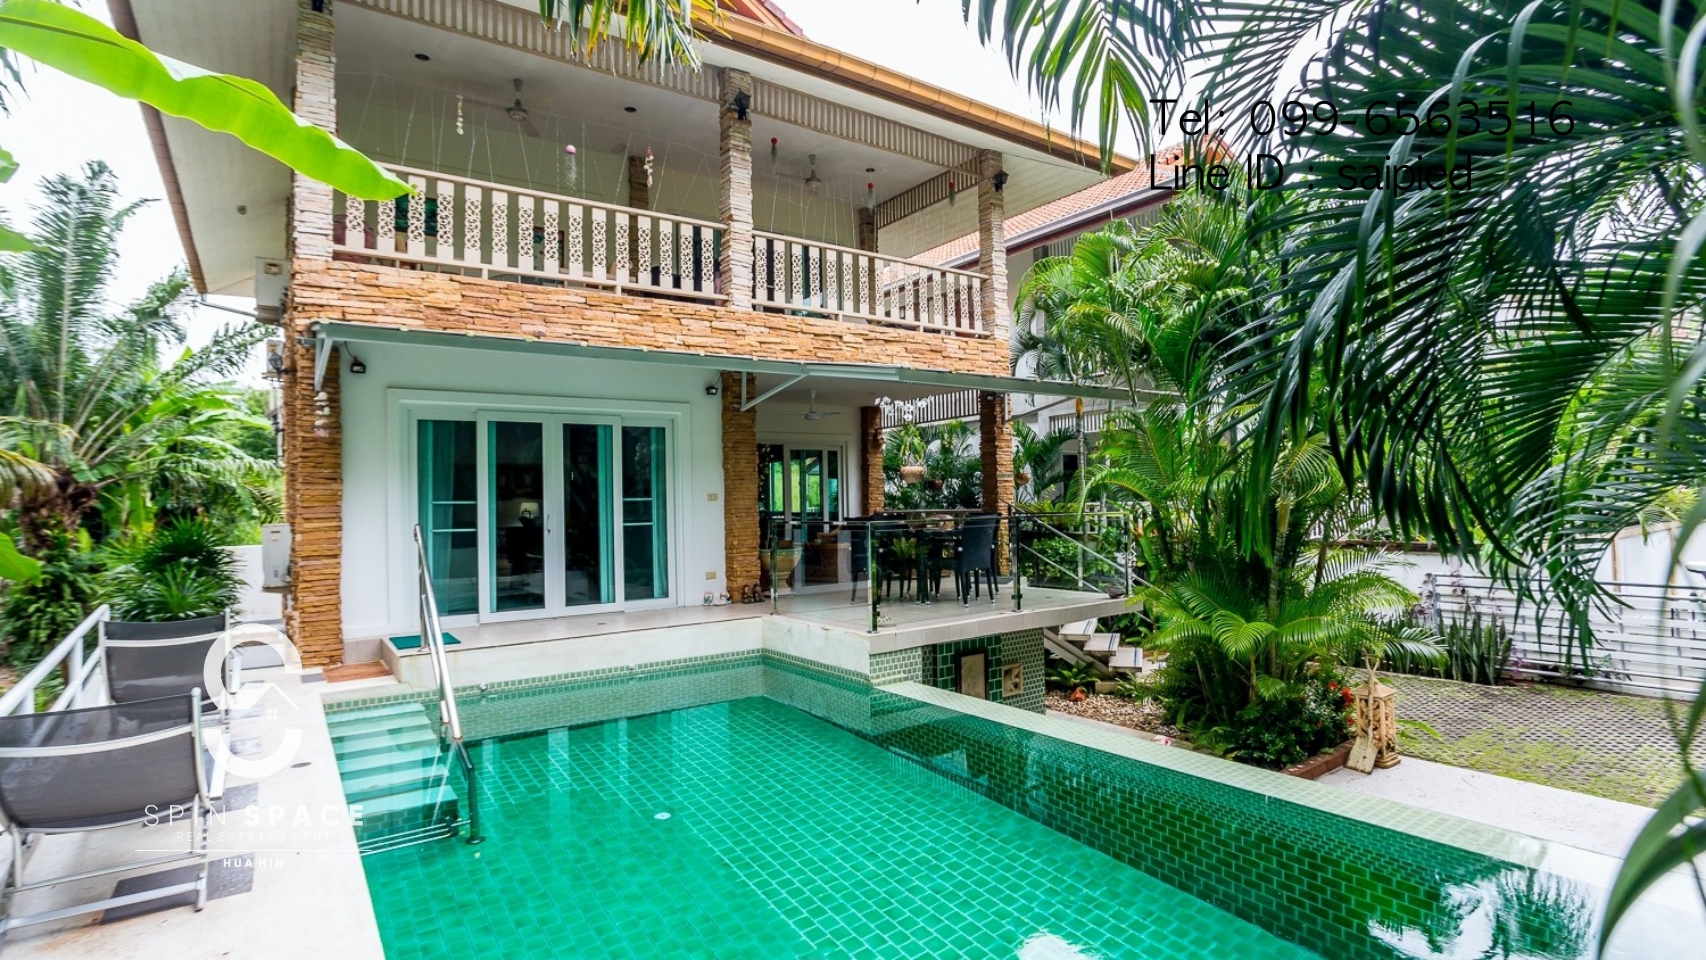 The Gorgeous Pool Villa For Sale